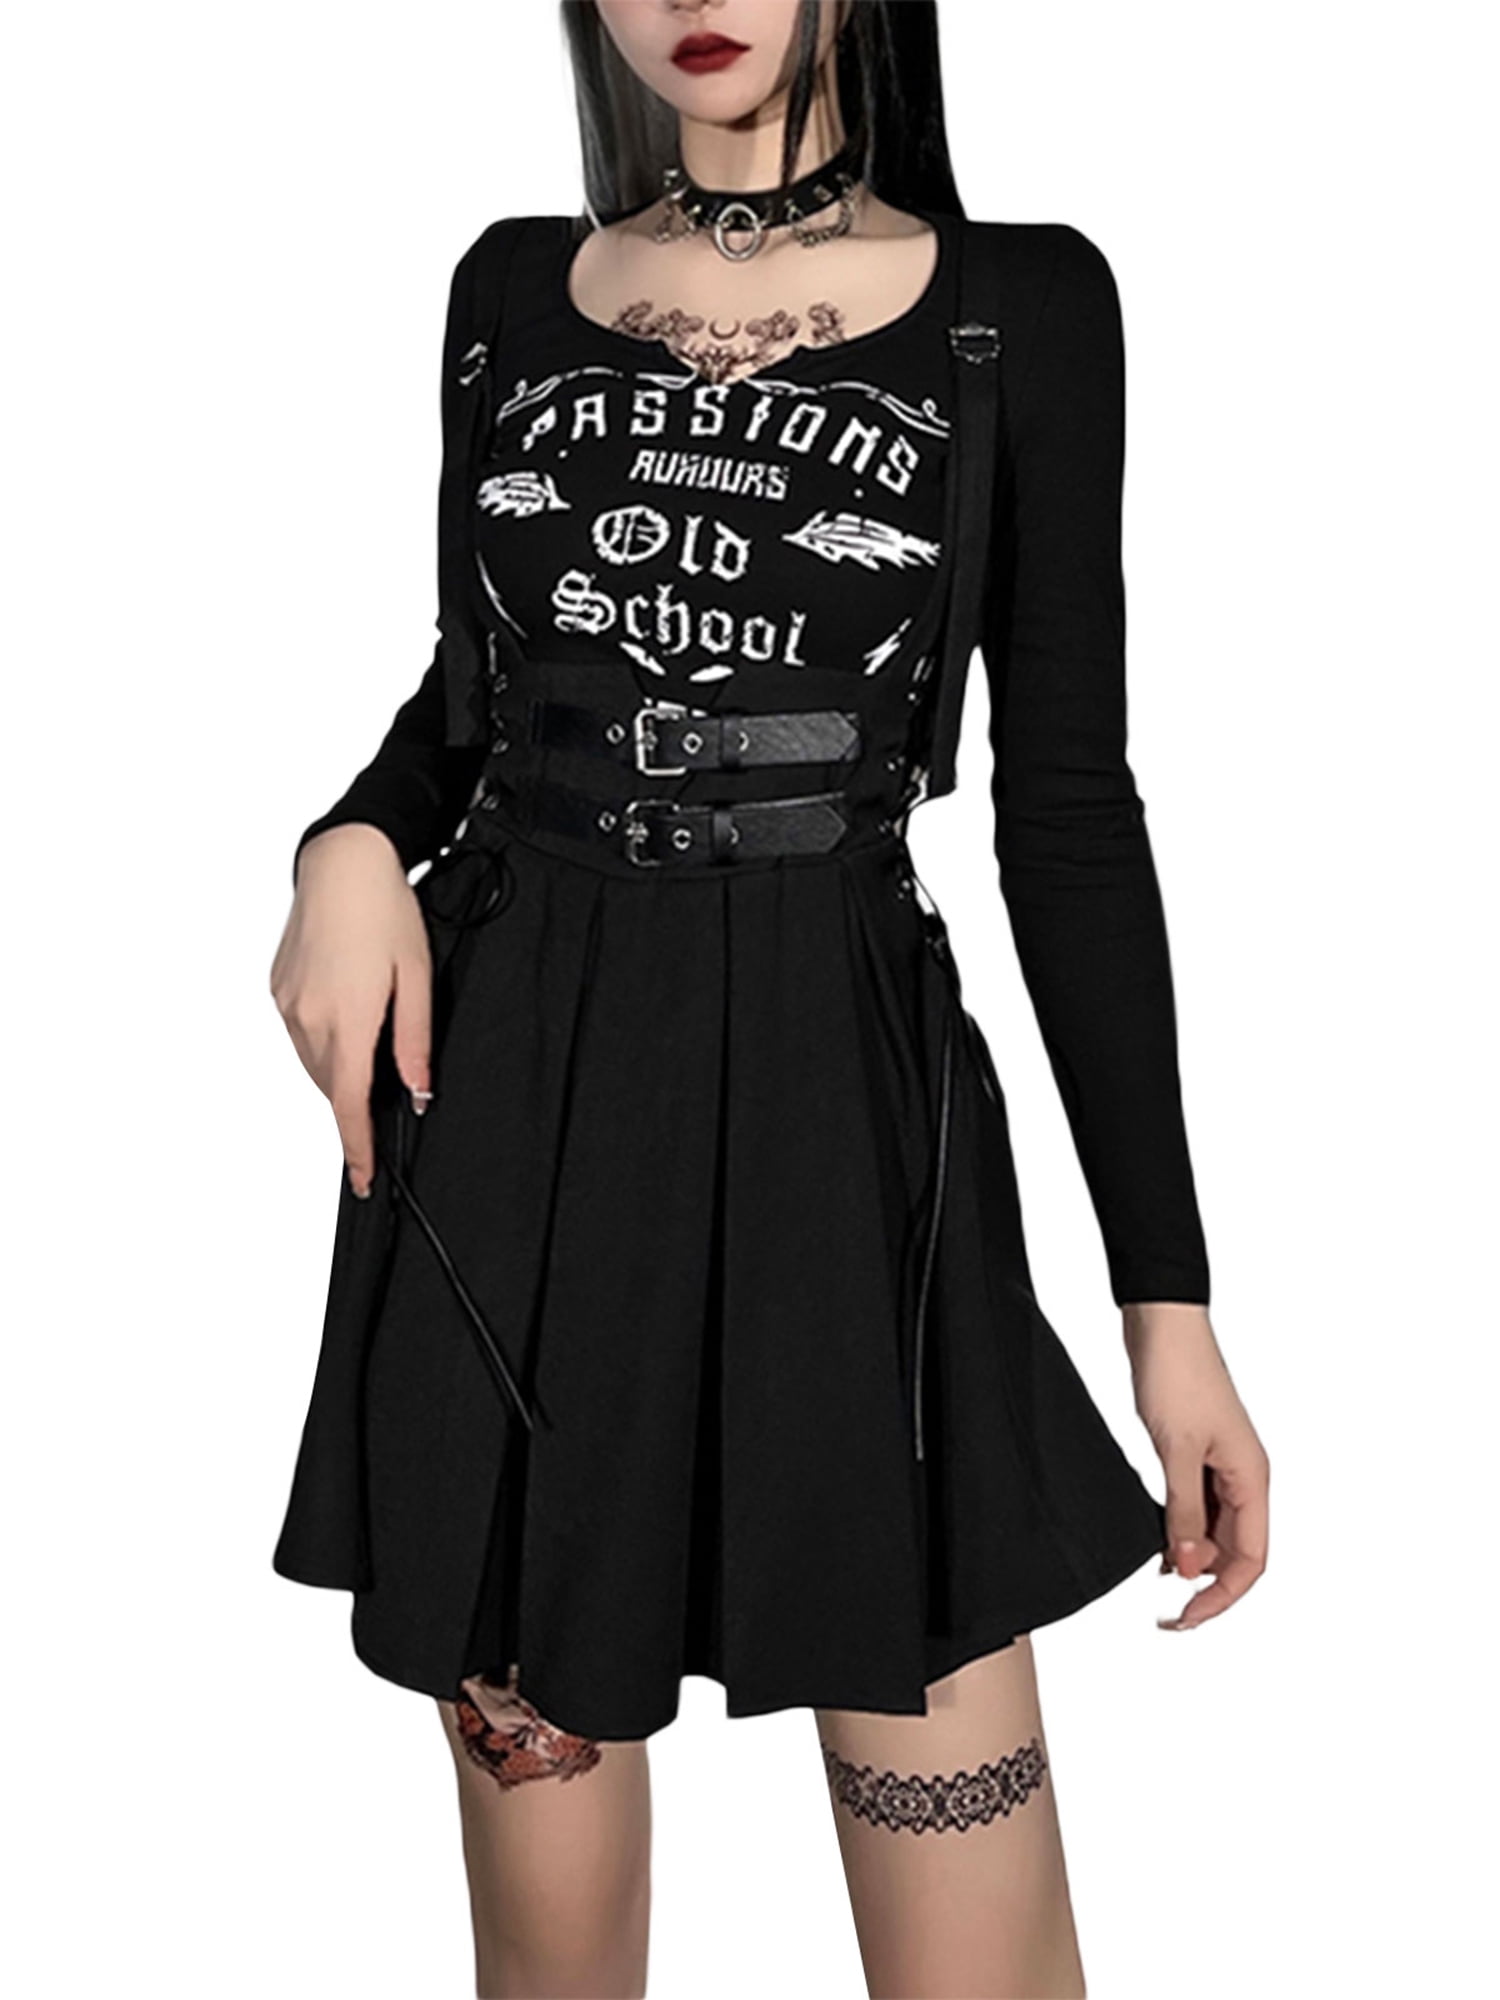 NEW Ladies Black lace frilly Skirt Gothic Rock Boho Gift Lolita Biker Party 